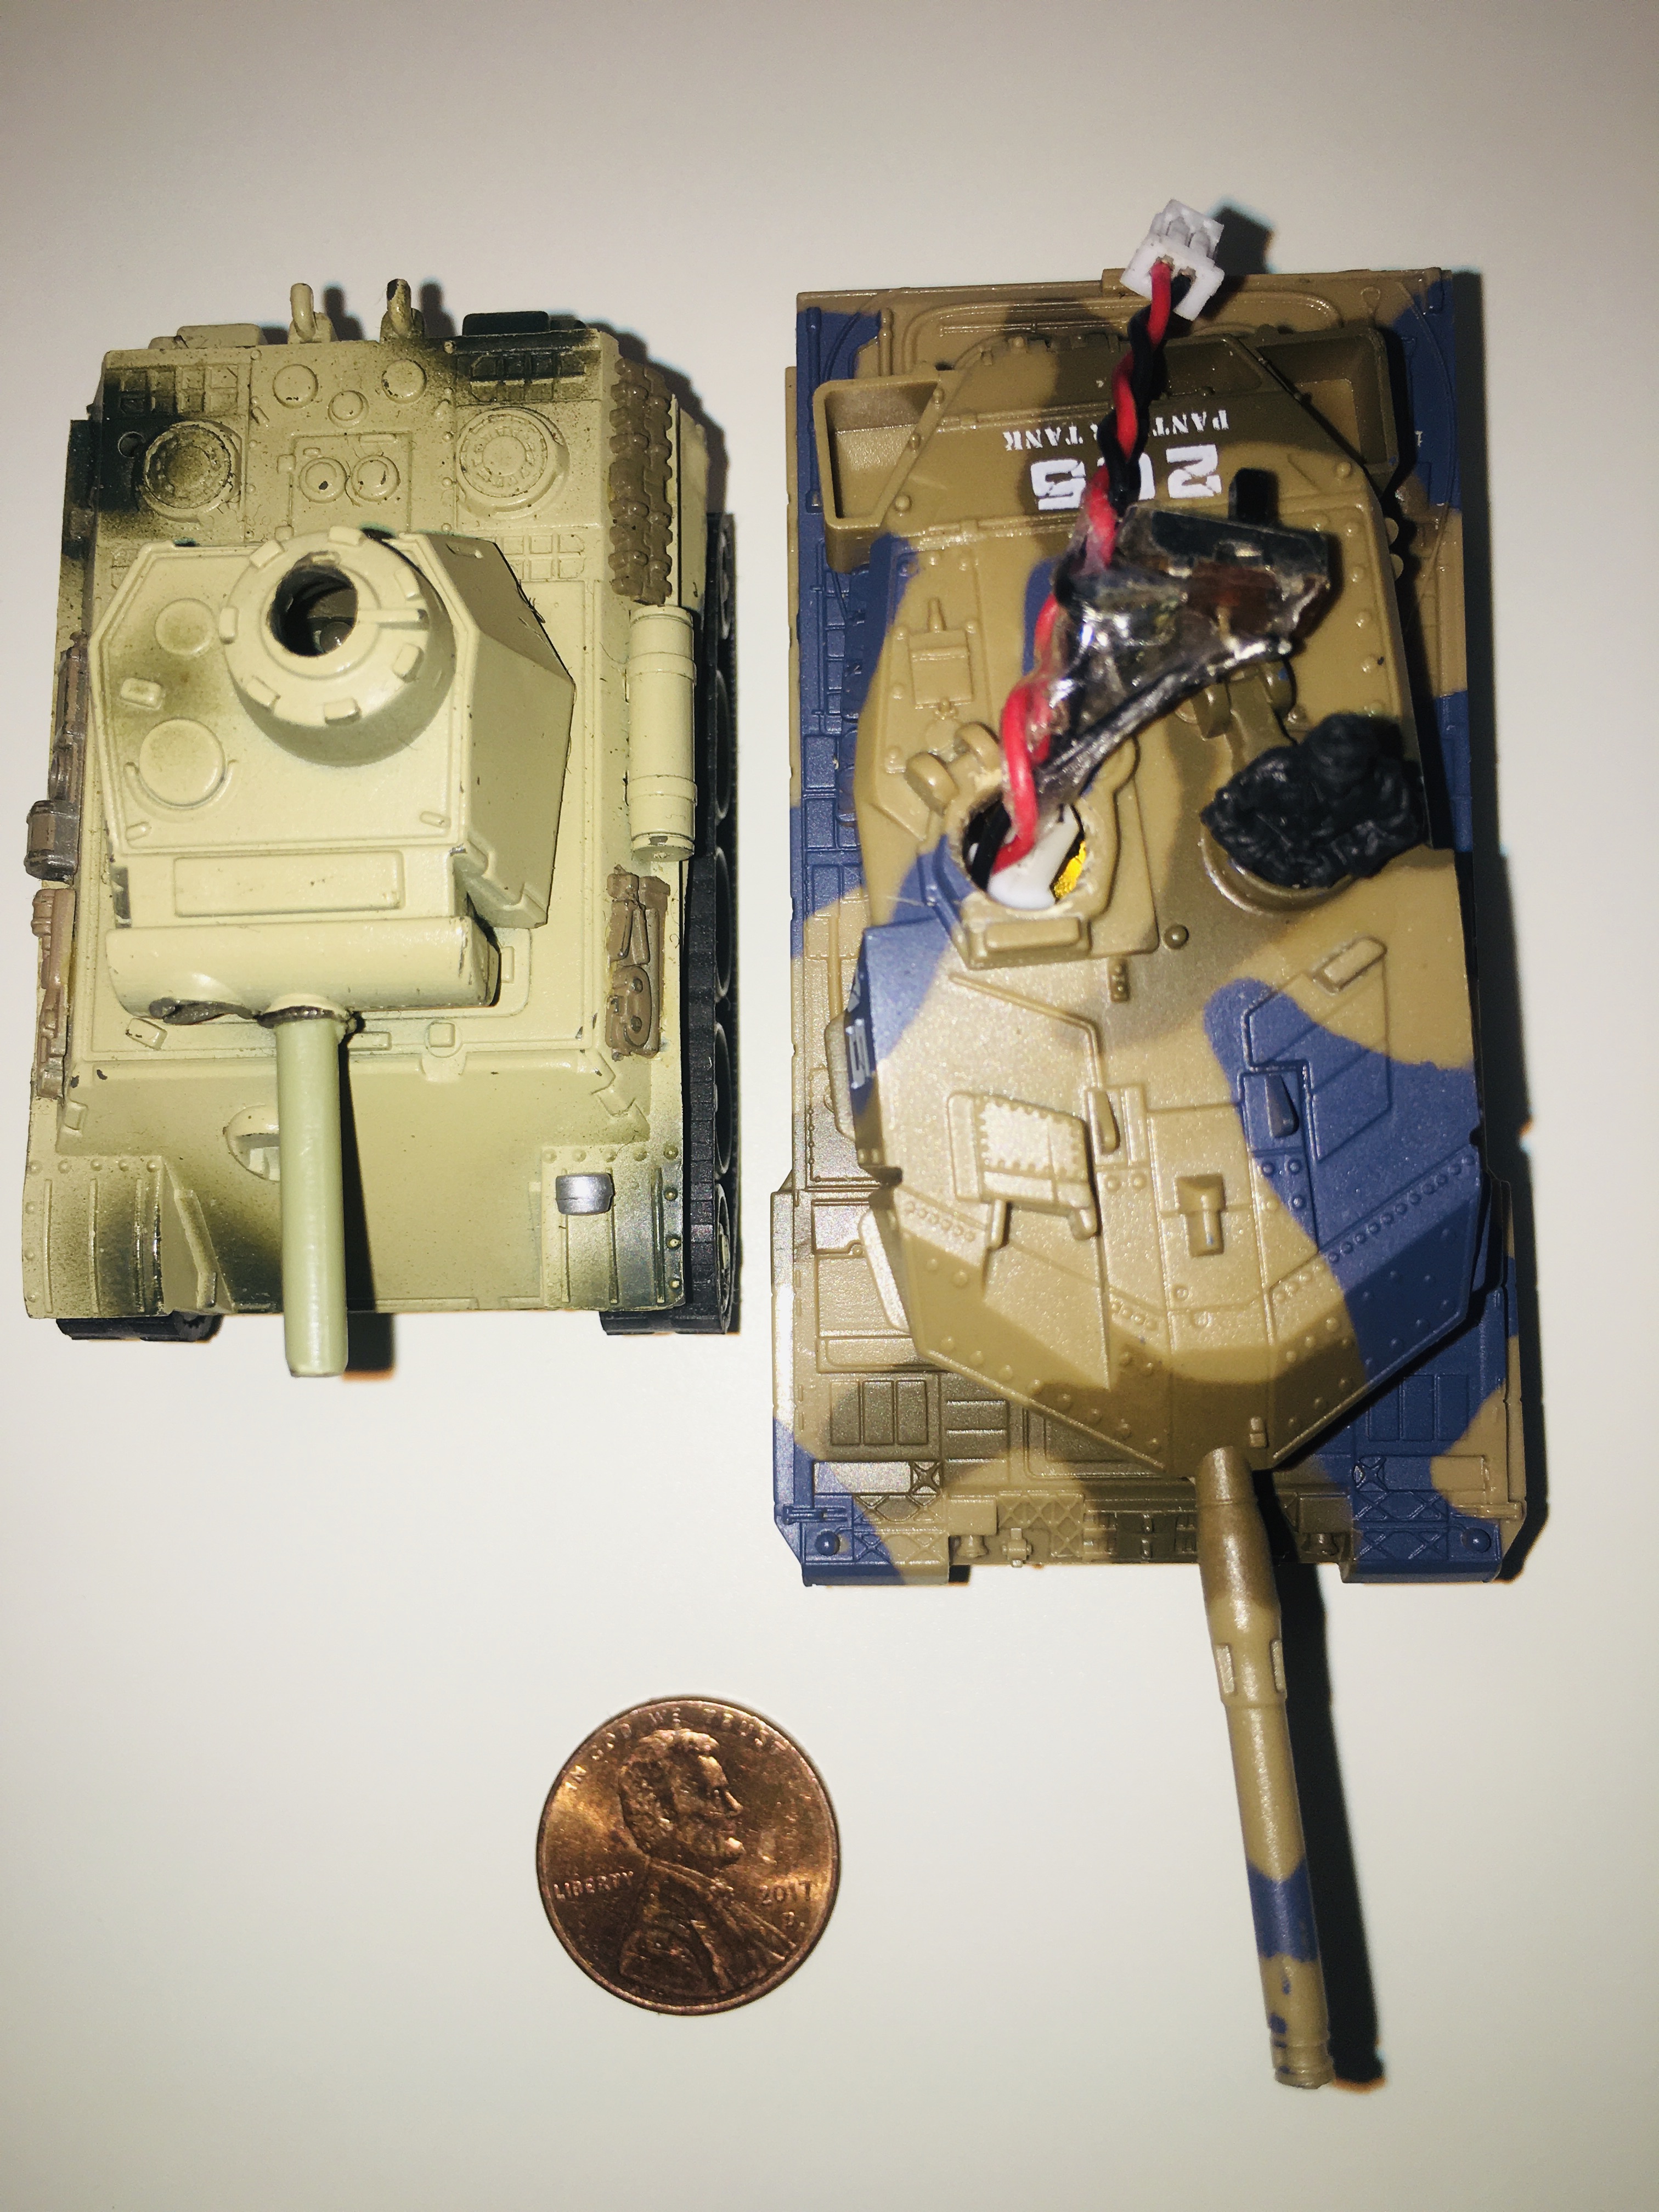 Both are 1:77 scale. I am switching to the Leopard II as it has superior ITL Tracks with sprocket teeth drive to the track. The plastic ITL track design requires less power to run than a low tech 1 piece rubber Track. The 100mAh lipo is mounted in the Leopard II Turret. A wiring harness with LVC added with on\off switch and lipo charging plug is now visible on the Leppard II Turret.